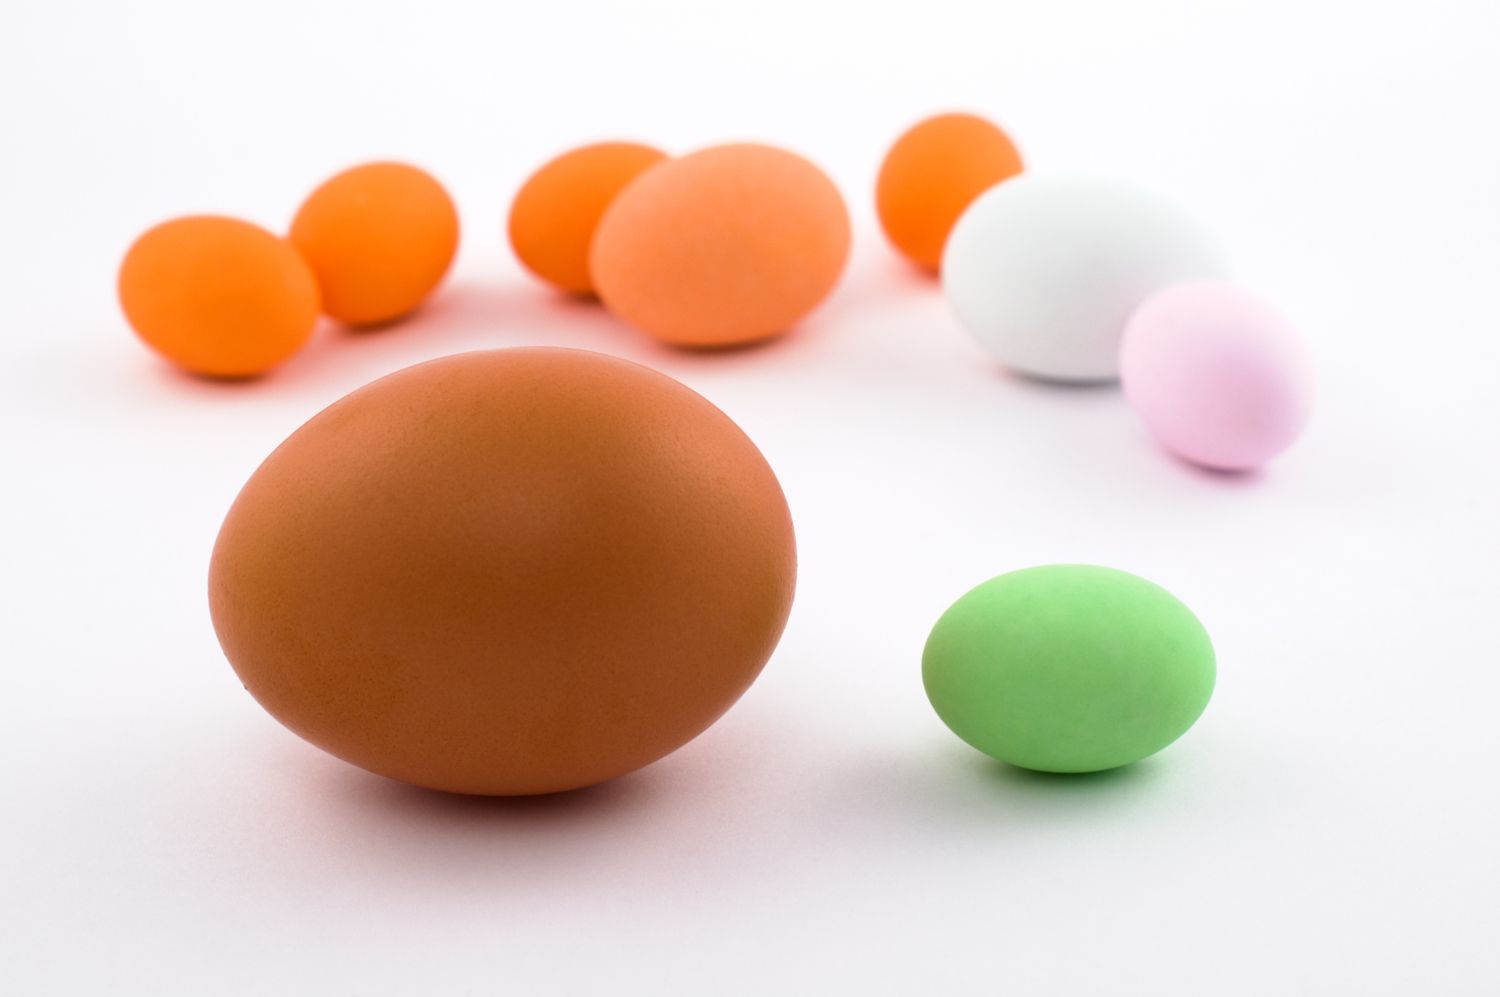 There is more to an egg than meets the eye - interesting egg facts ...